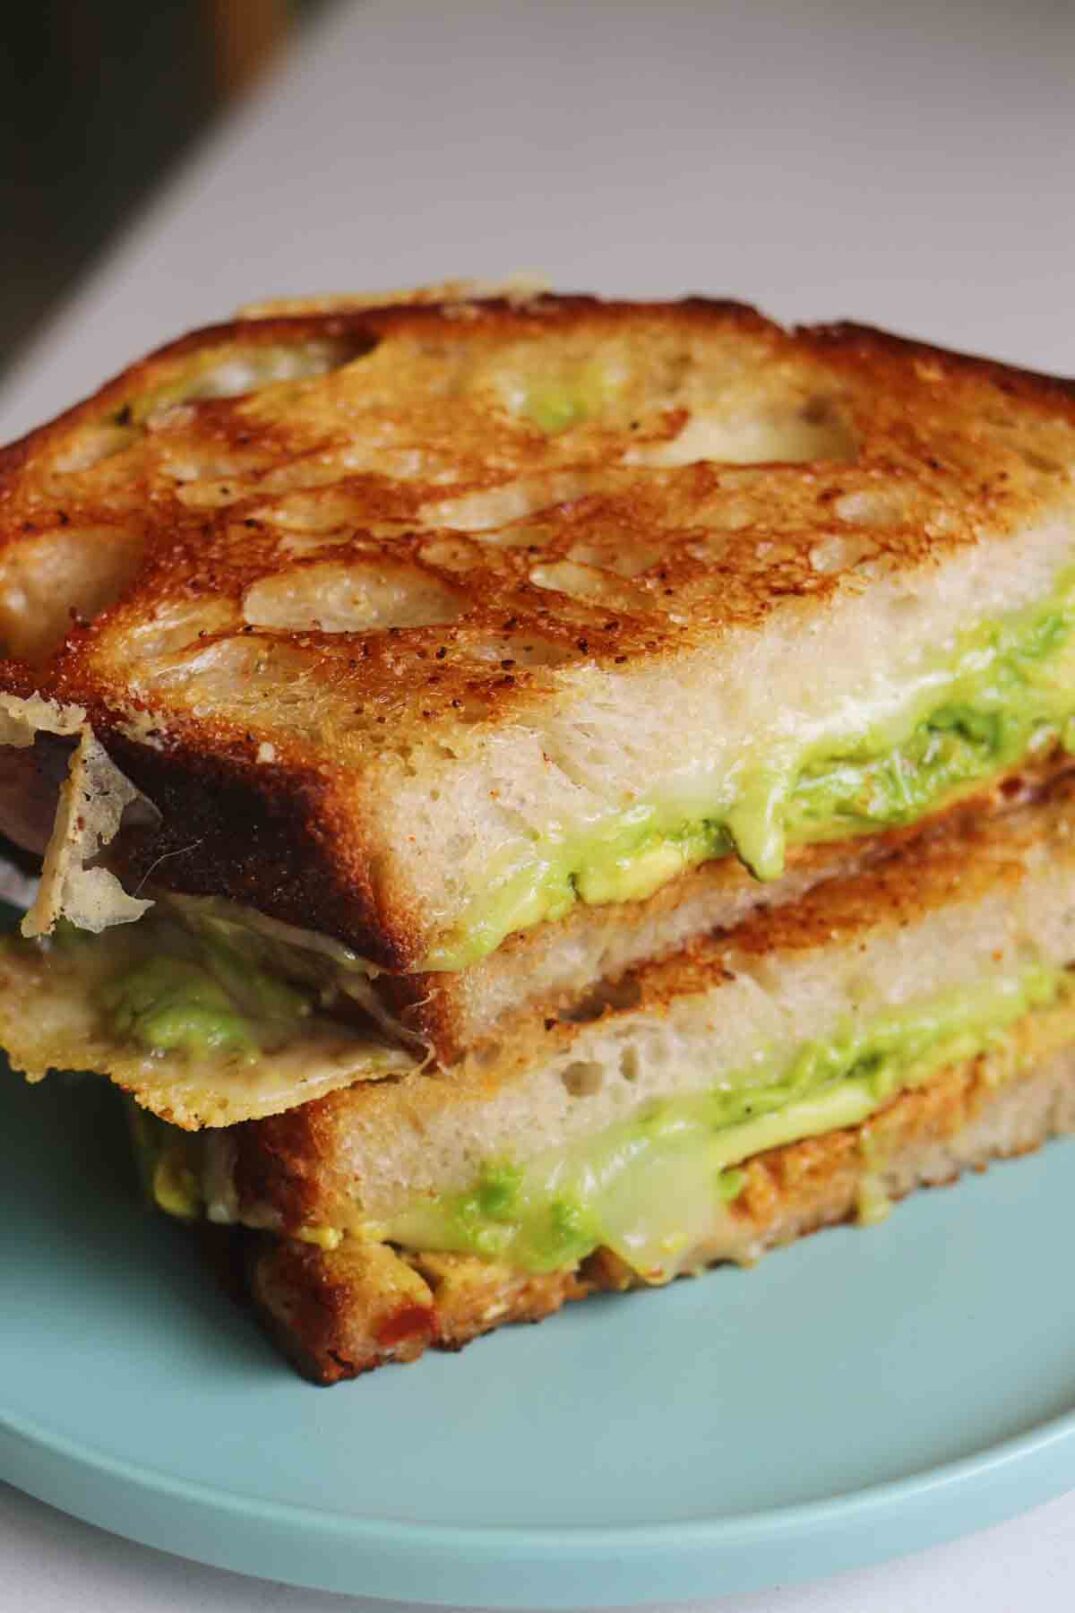 crusty golden bread with oozing cheese and green avocado on a blue plate.